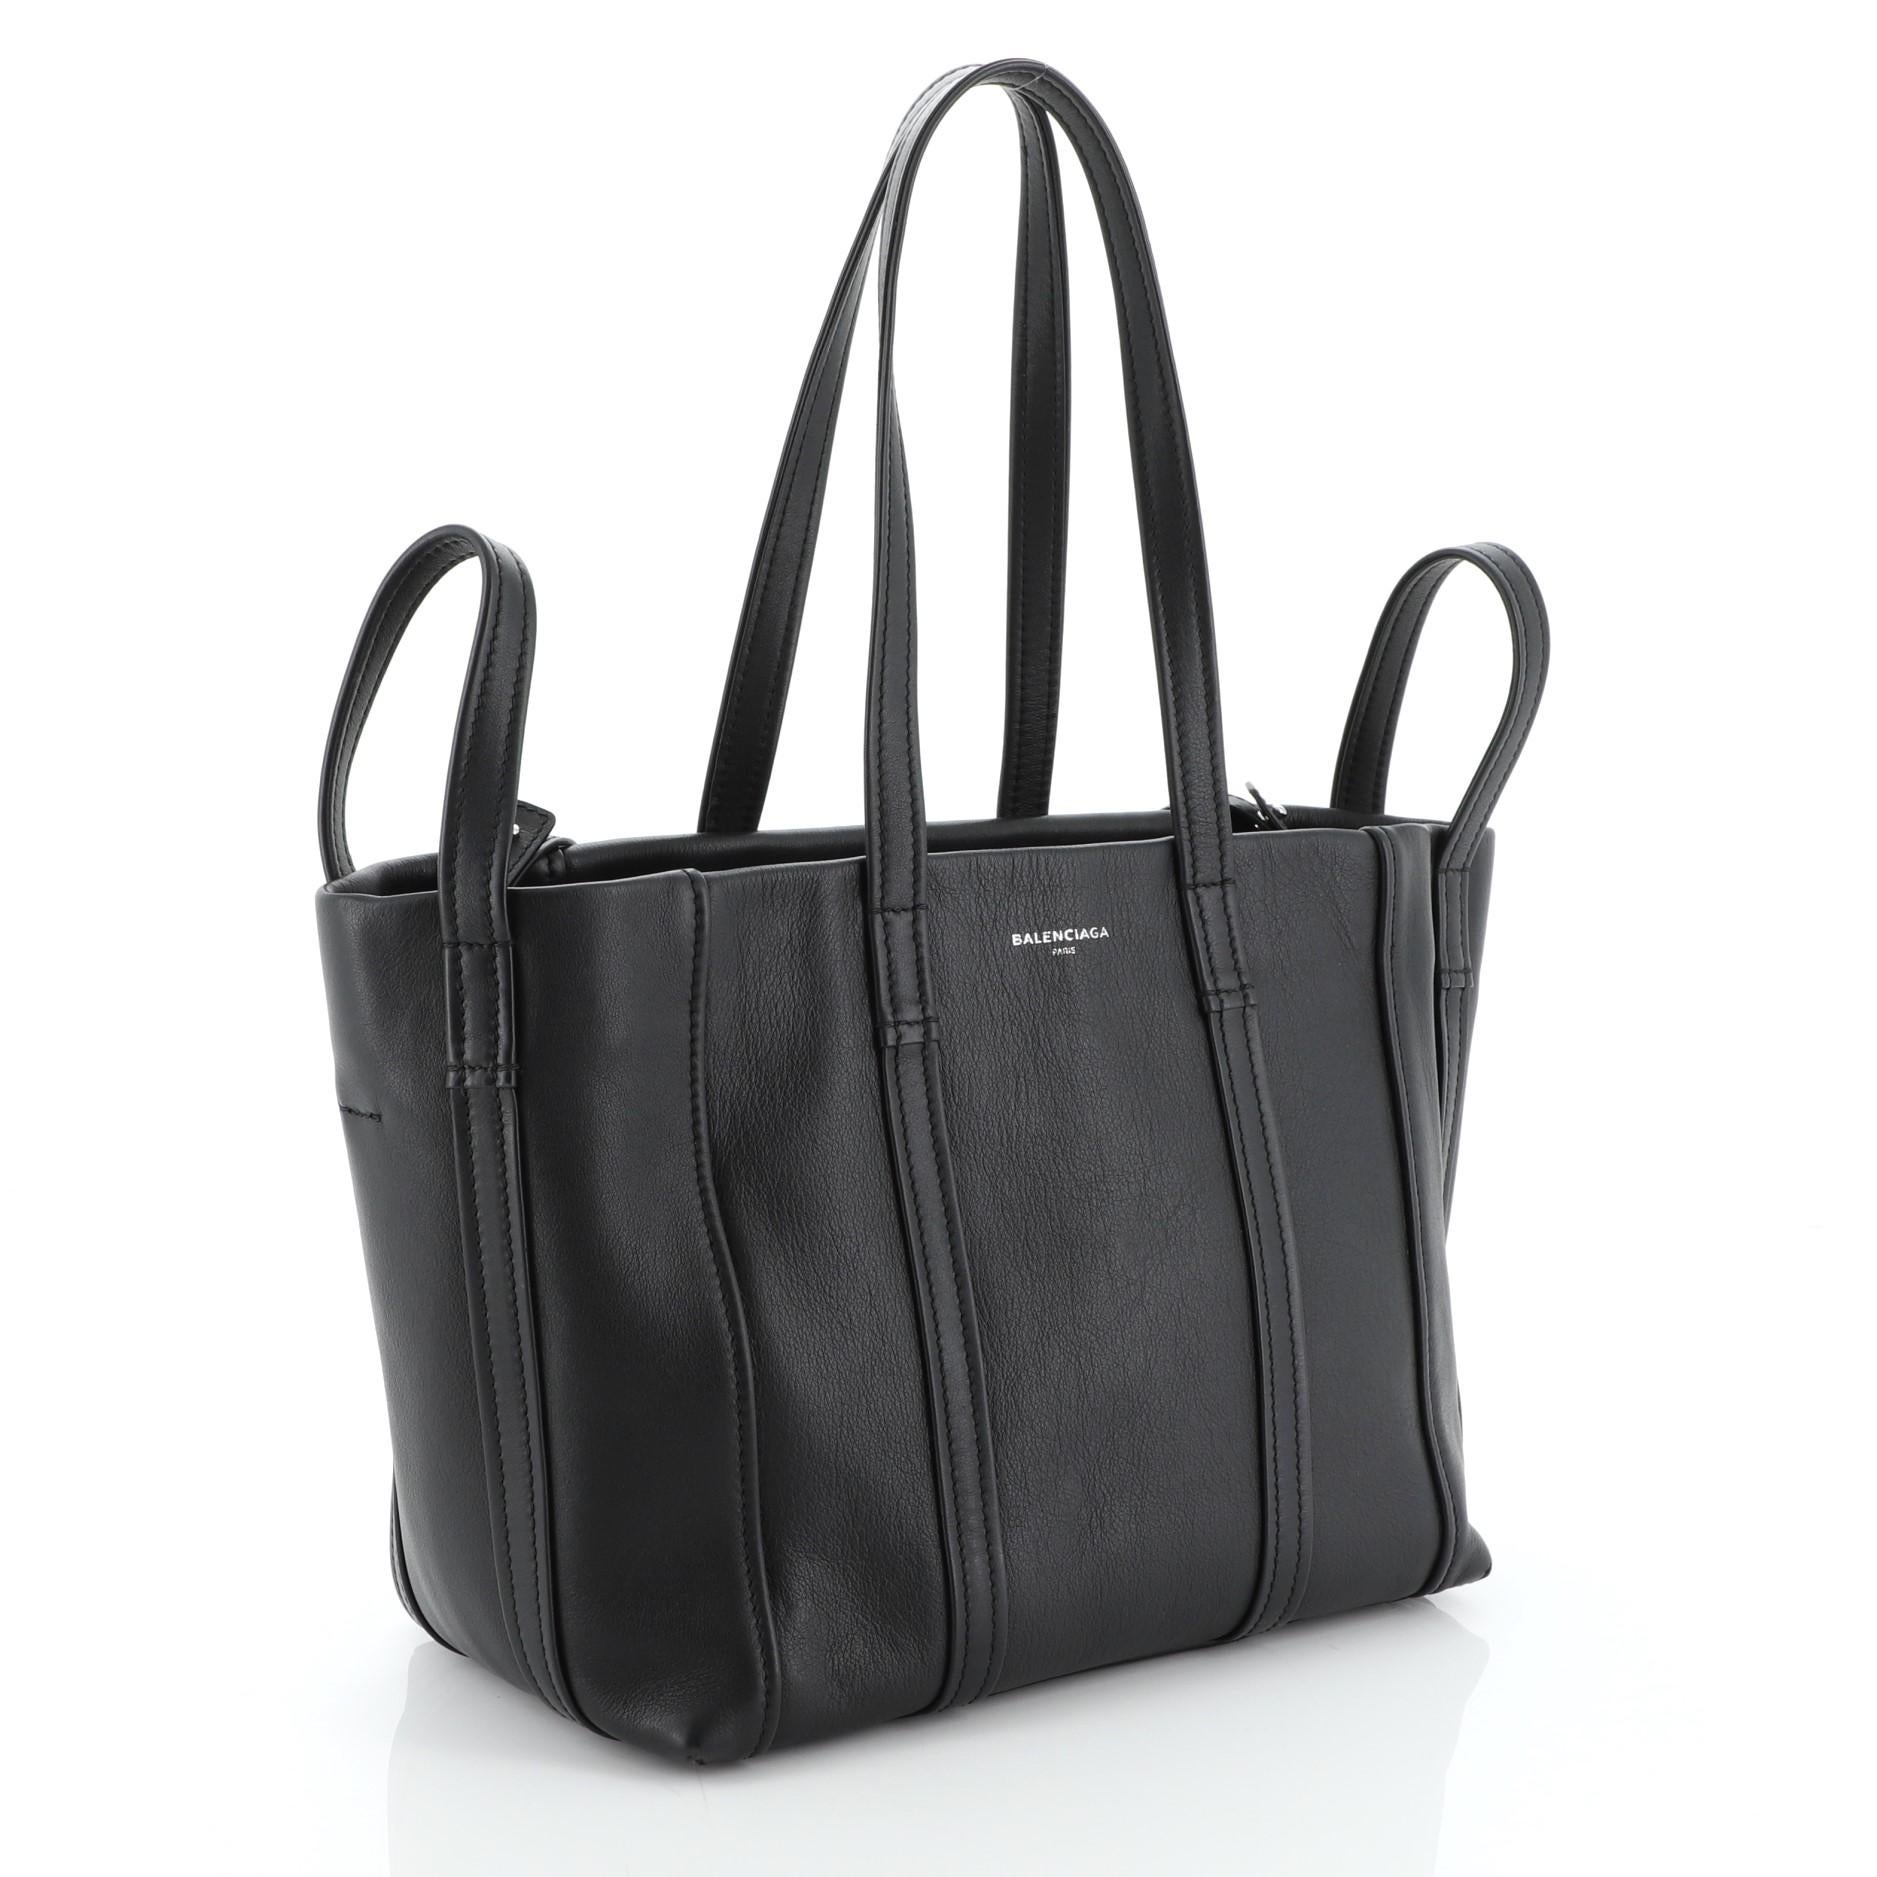 This Balenciaga Laundry Cabas Tote Leather Medium, crafted in black leather, features twin top handles and silver-tone hardware. It opens to a black leather interior with zip pocket. 

Condition: Very good. Slight creasing near base, minor wear on